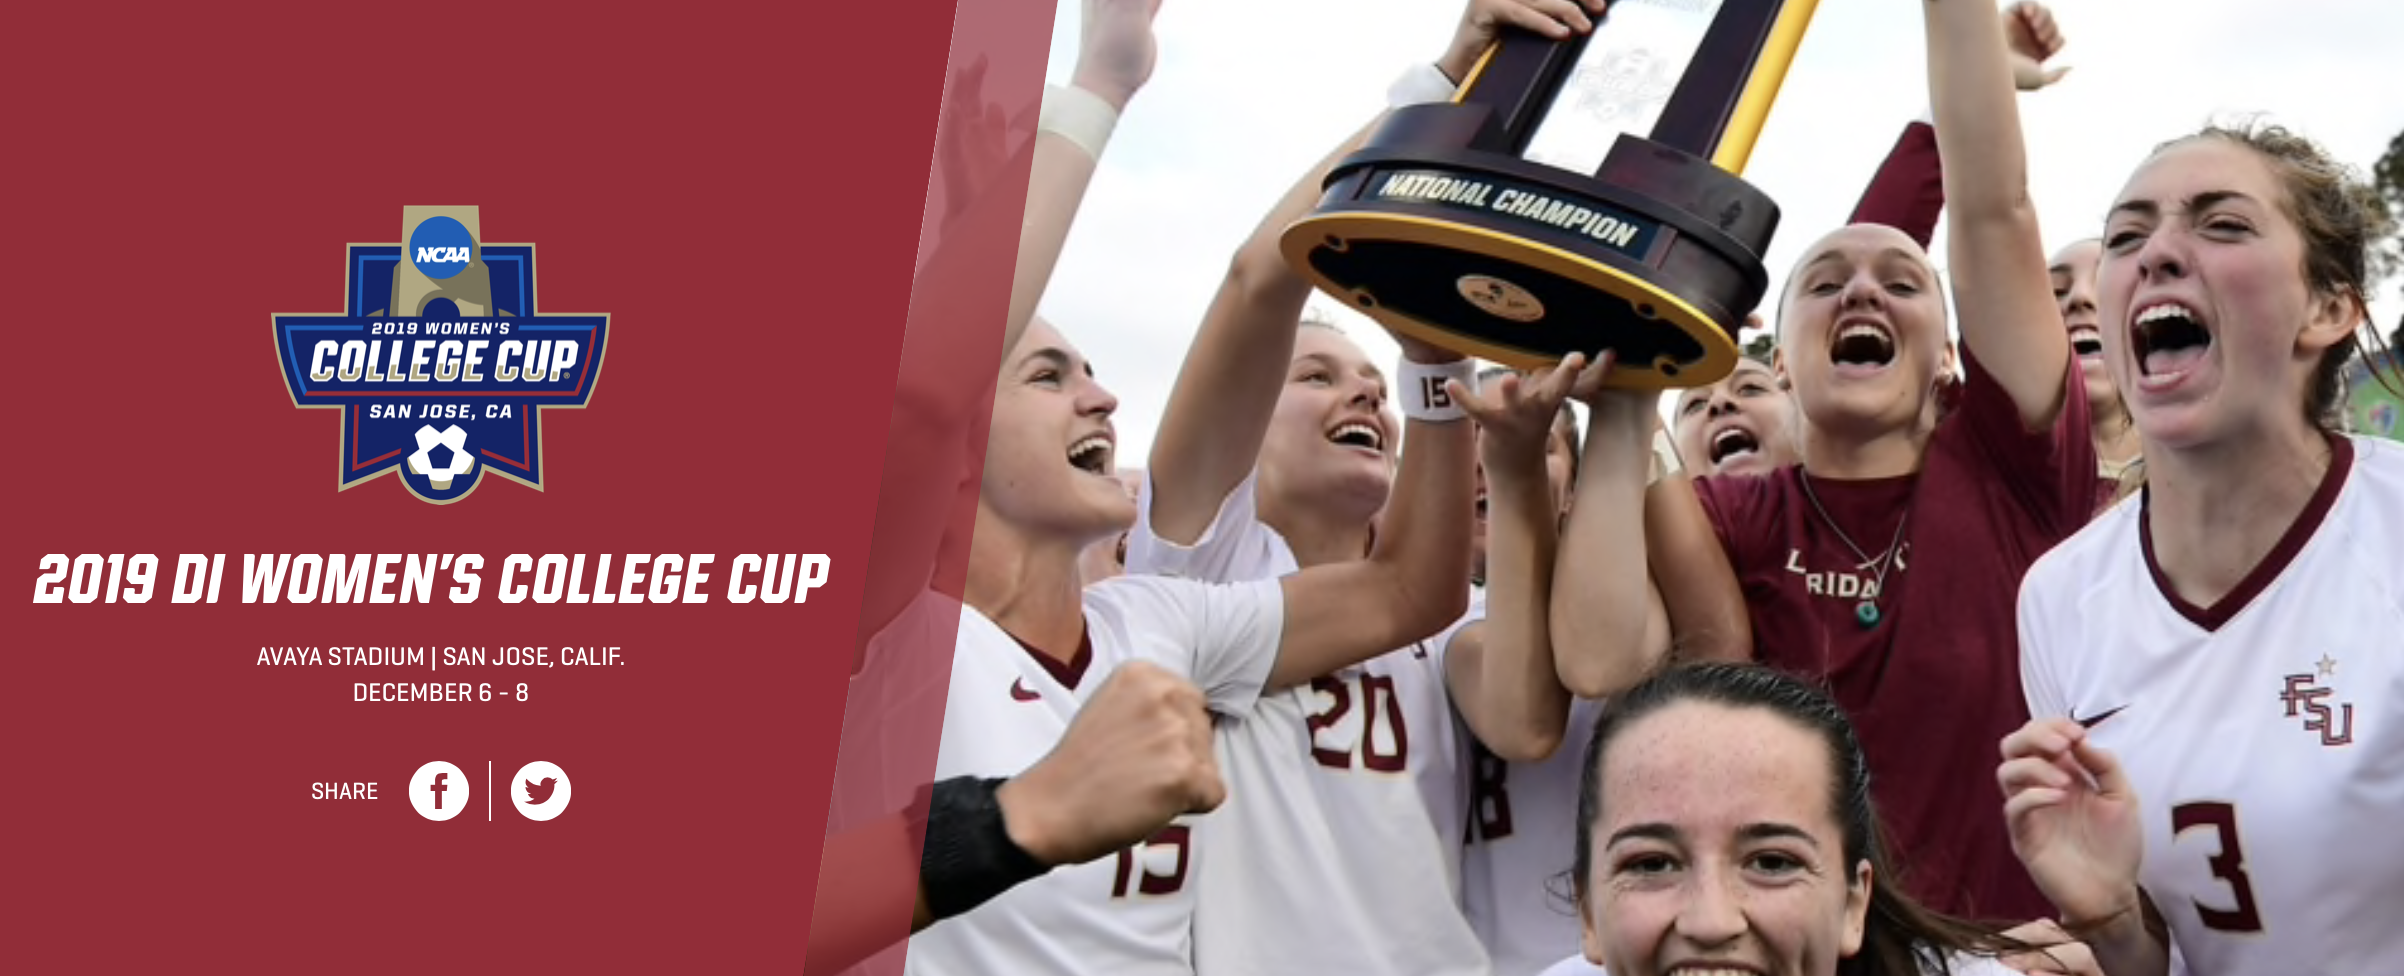 2019 Women's College Cup